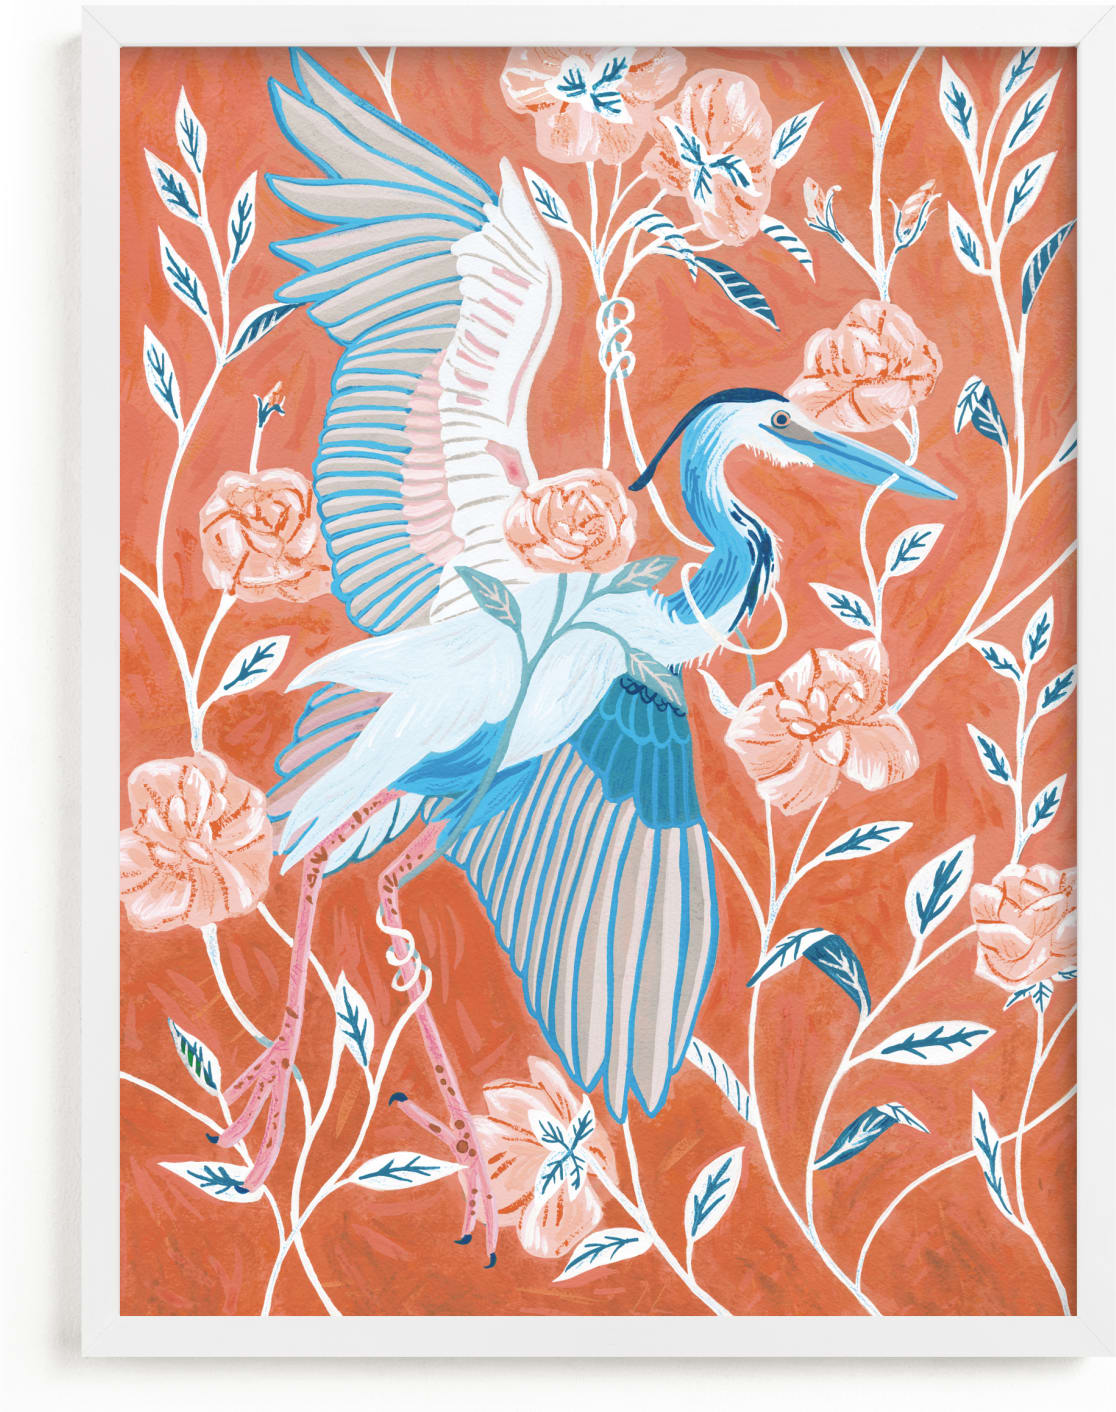 This is a blue, pink, orange art by Stefanie Lane called Blue Heron with Blossoms.